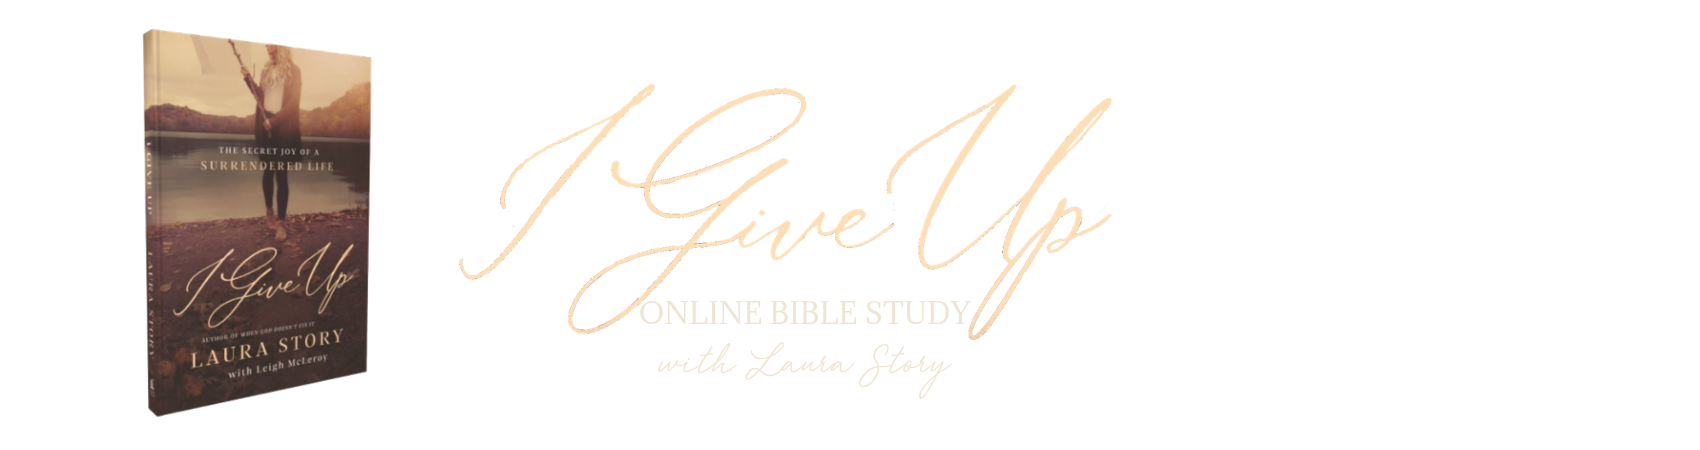 You’re Invited to the I Give Up Online Bible Study